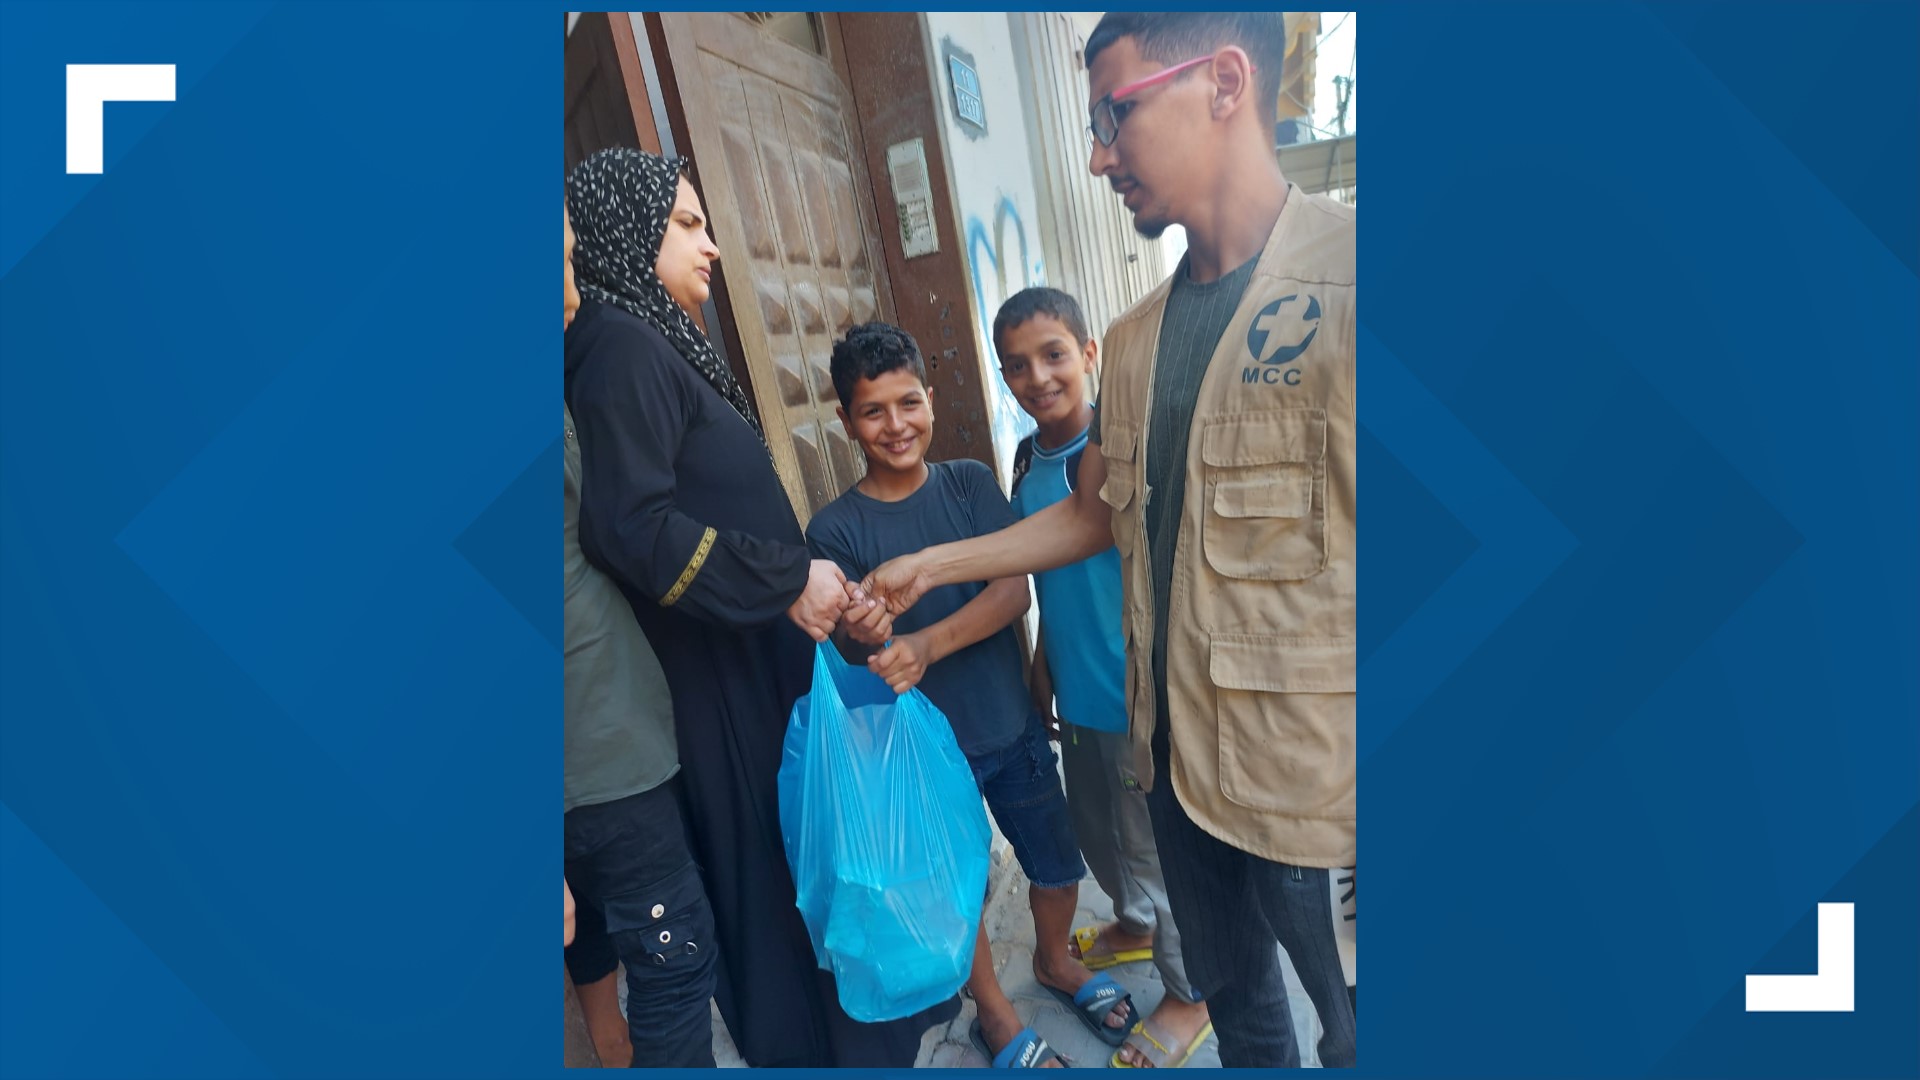 The Mennonite Central Committee is working with partners on the ground to provide immediate relief for families displaced by the Israel-Hamas conflict.